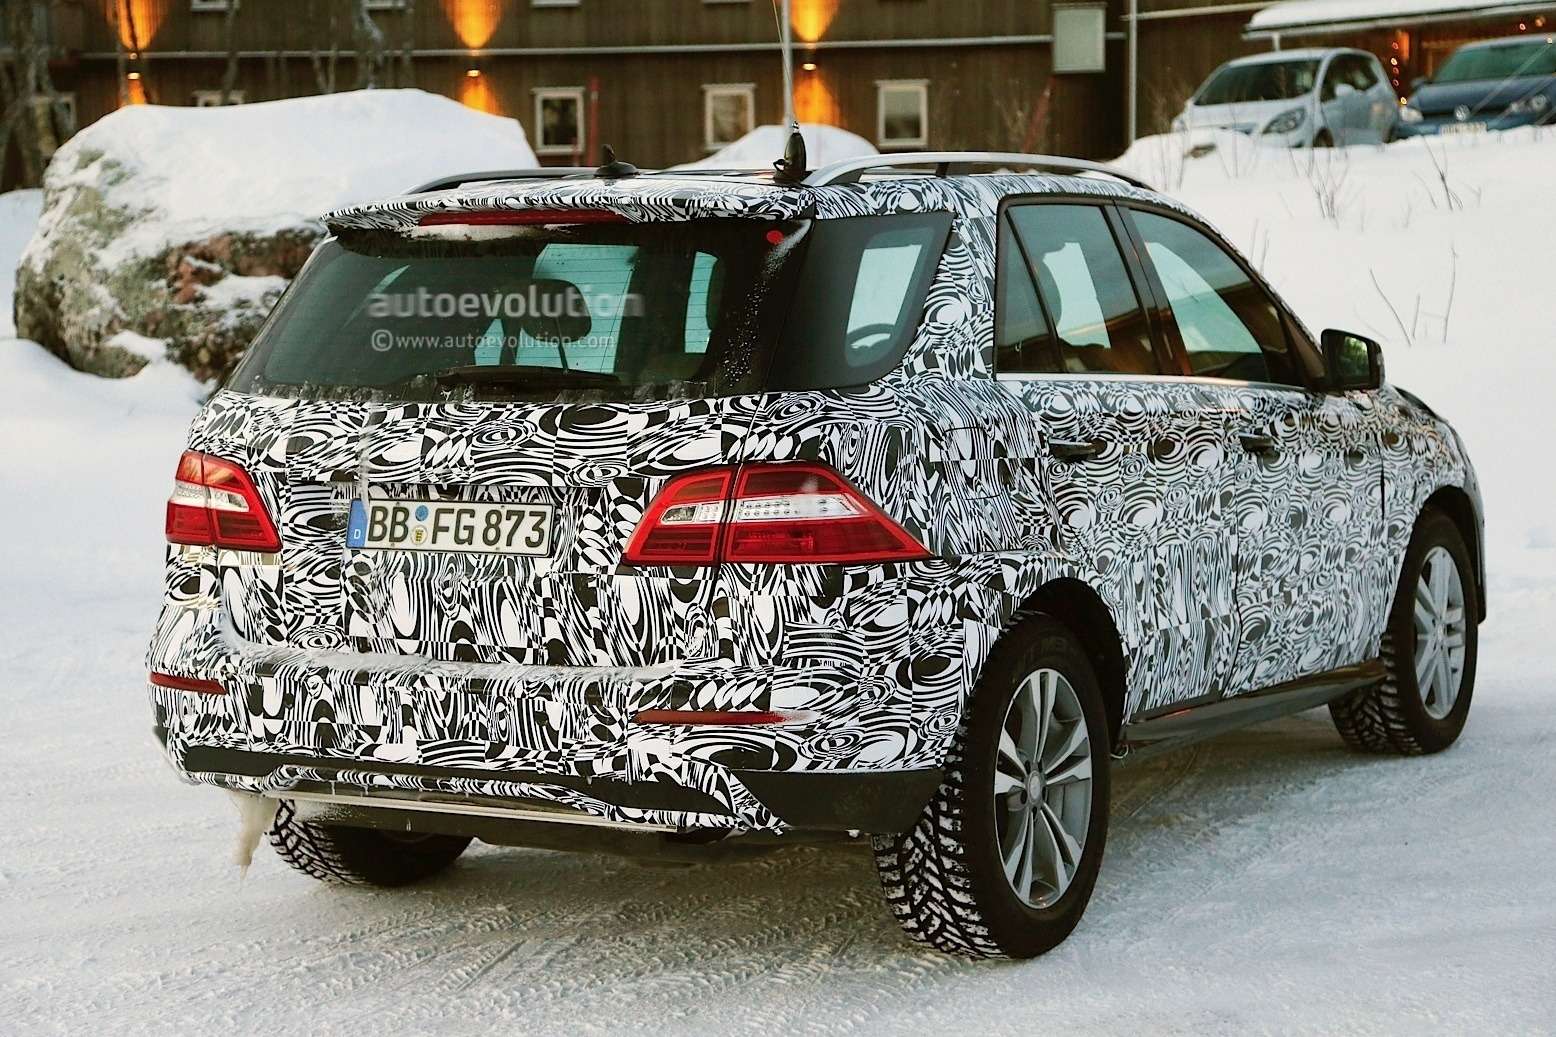 2015 mercedes benz m class facelift spied in lapland photo gallery 1080p 7 no copyright